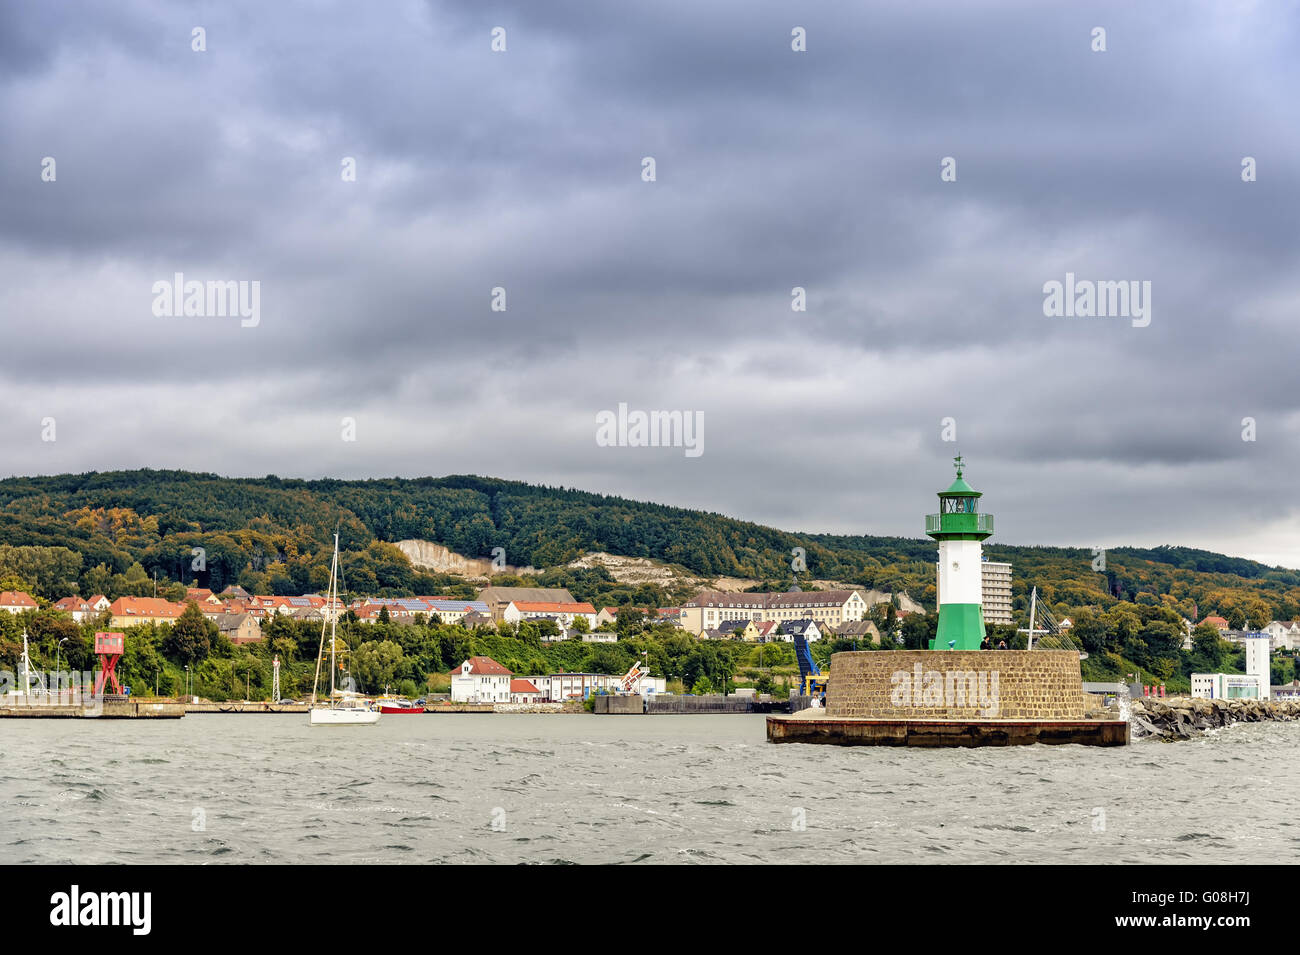 Port entrance with lighthouse pier and the town of Stock Photo